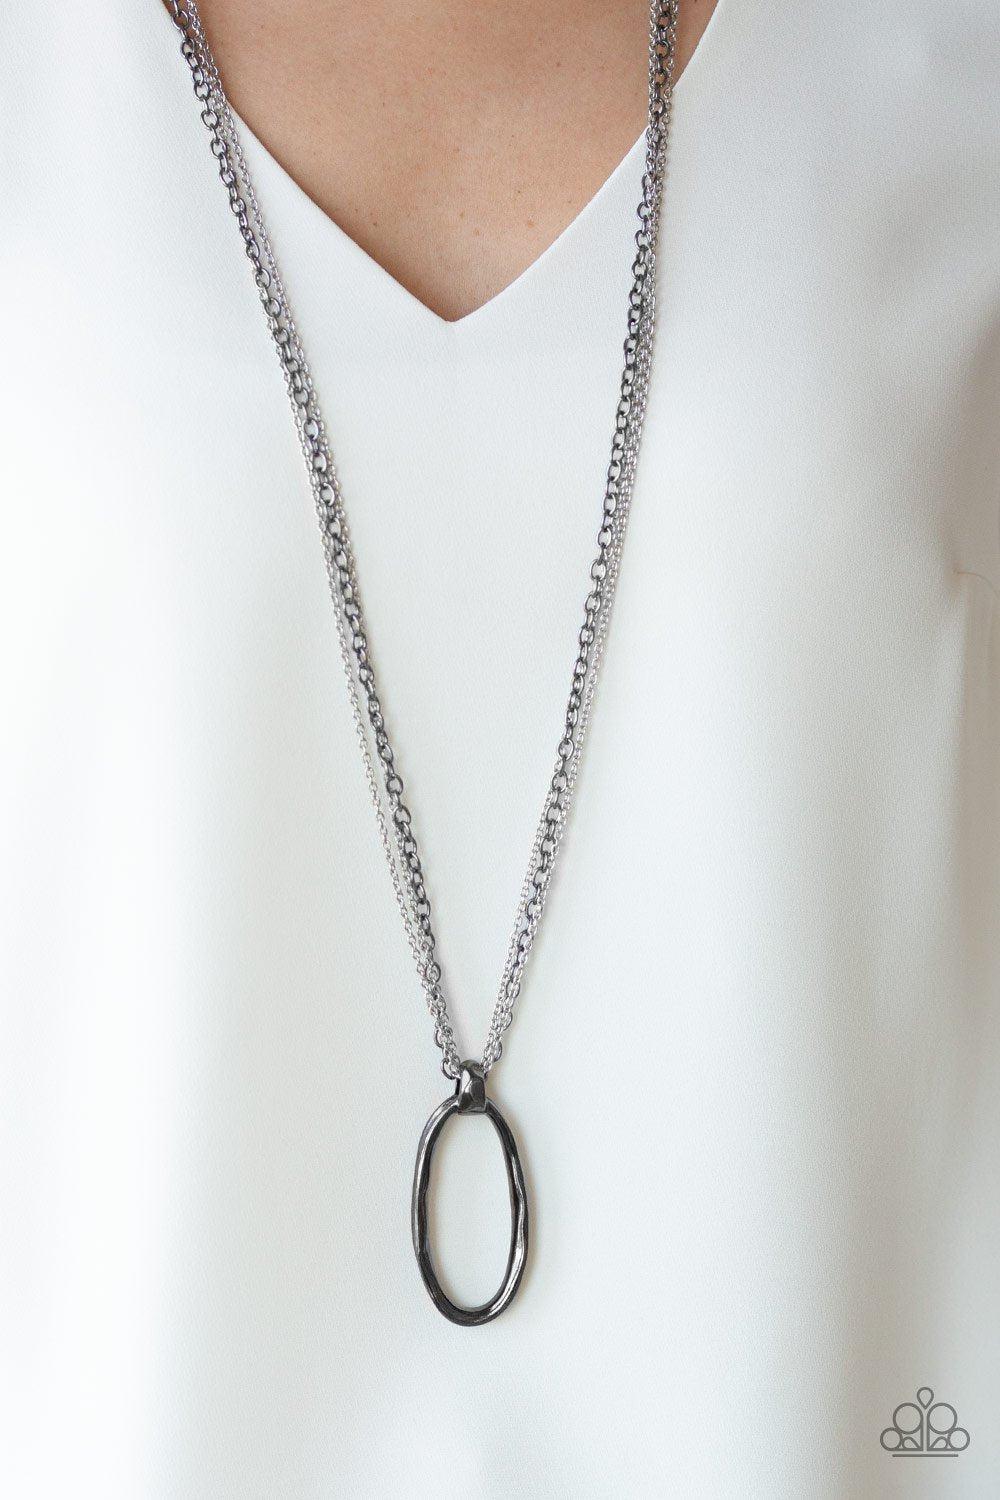 Industrial Confidence Gunmetal and Silver Necklace - Paparazzi Accessories-CarasShop.com - $5 Jewelry by Cara Jewels